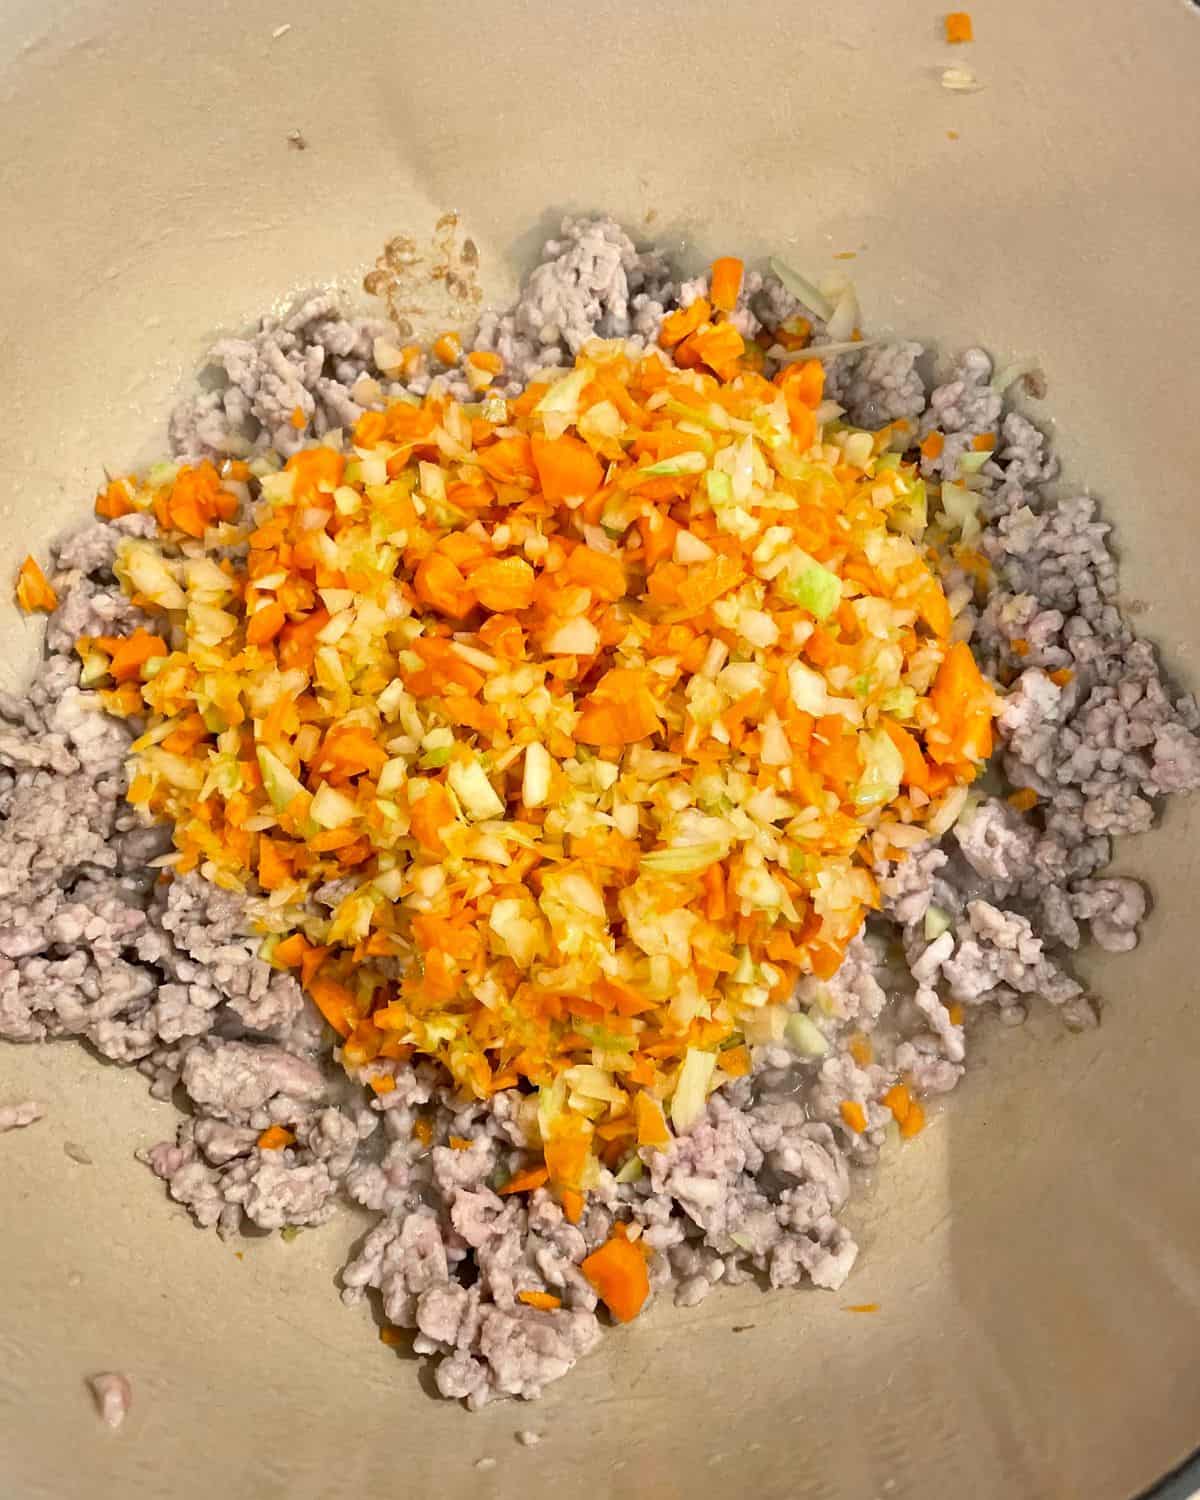 Carrots, onions, and celery added to the ground pork.